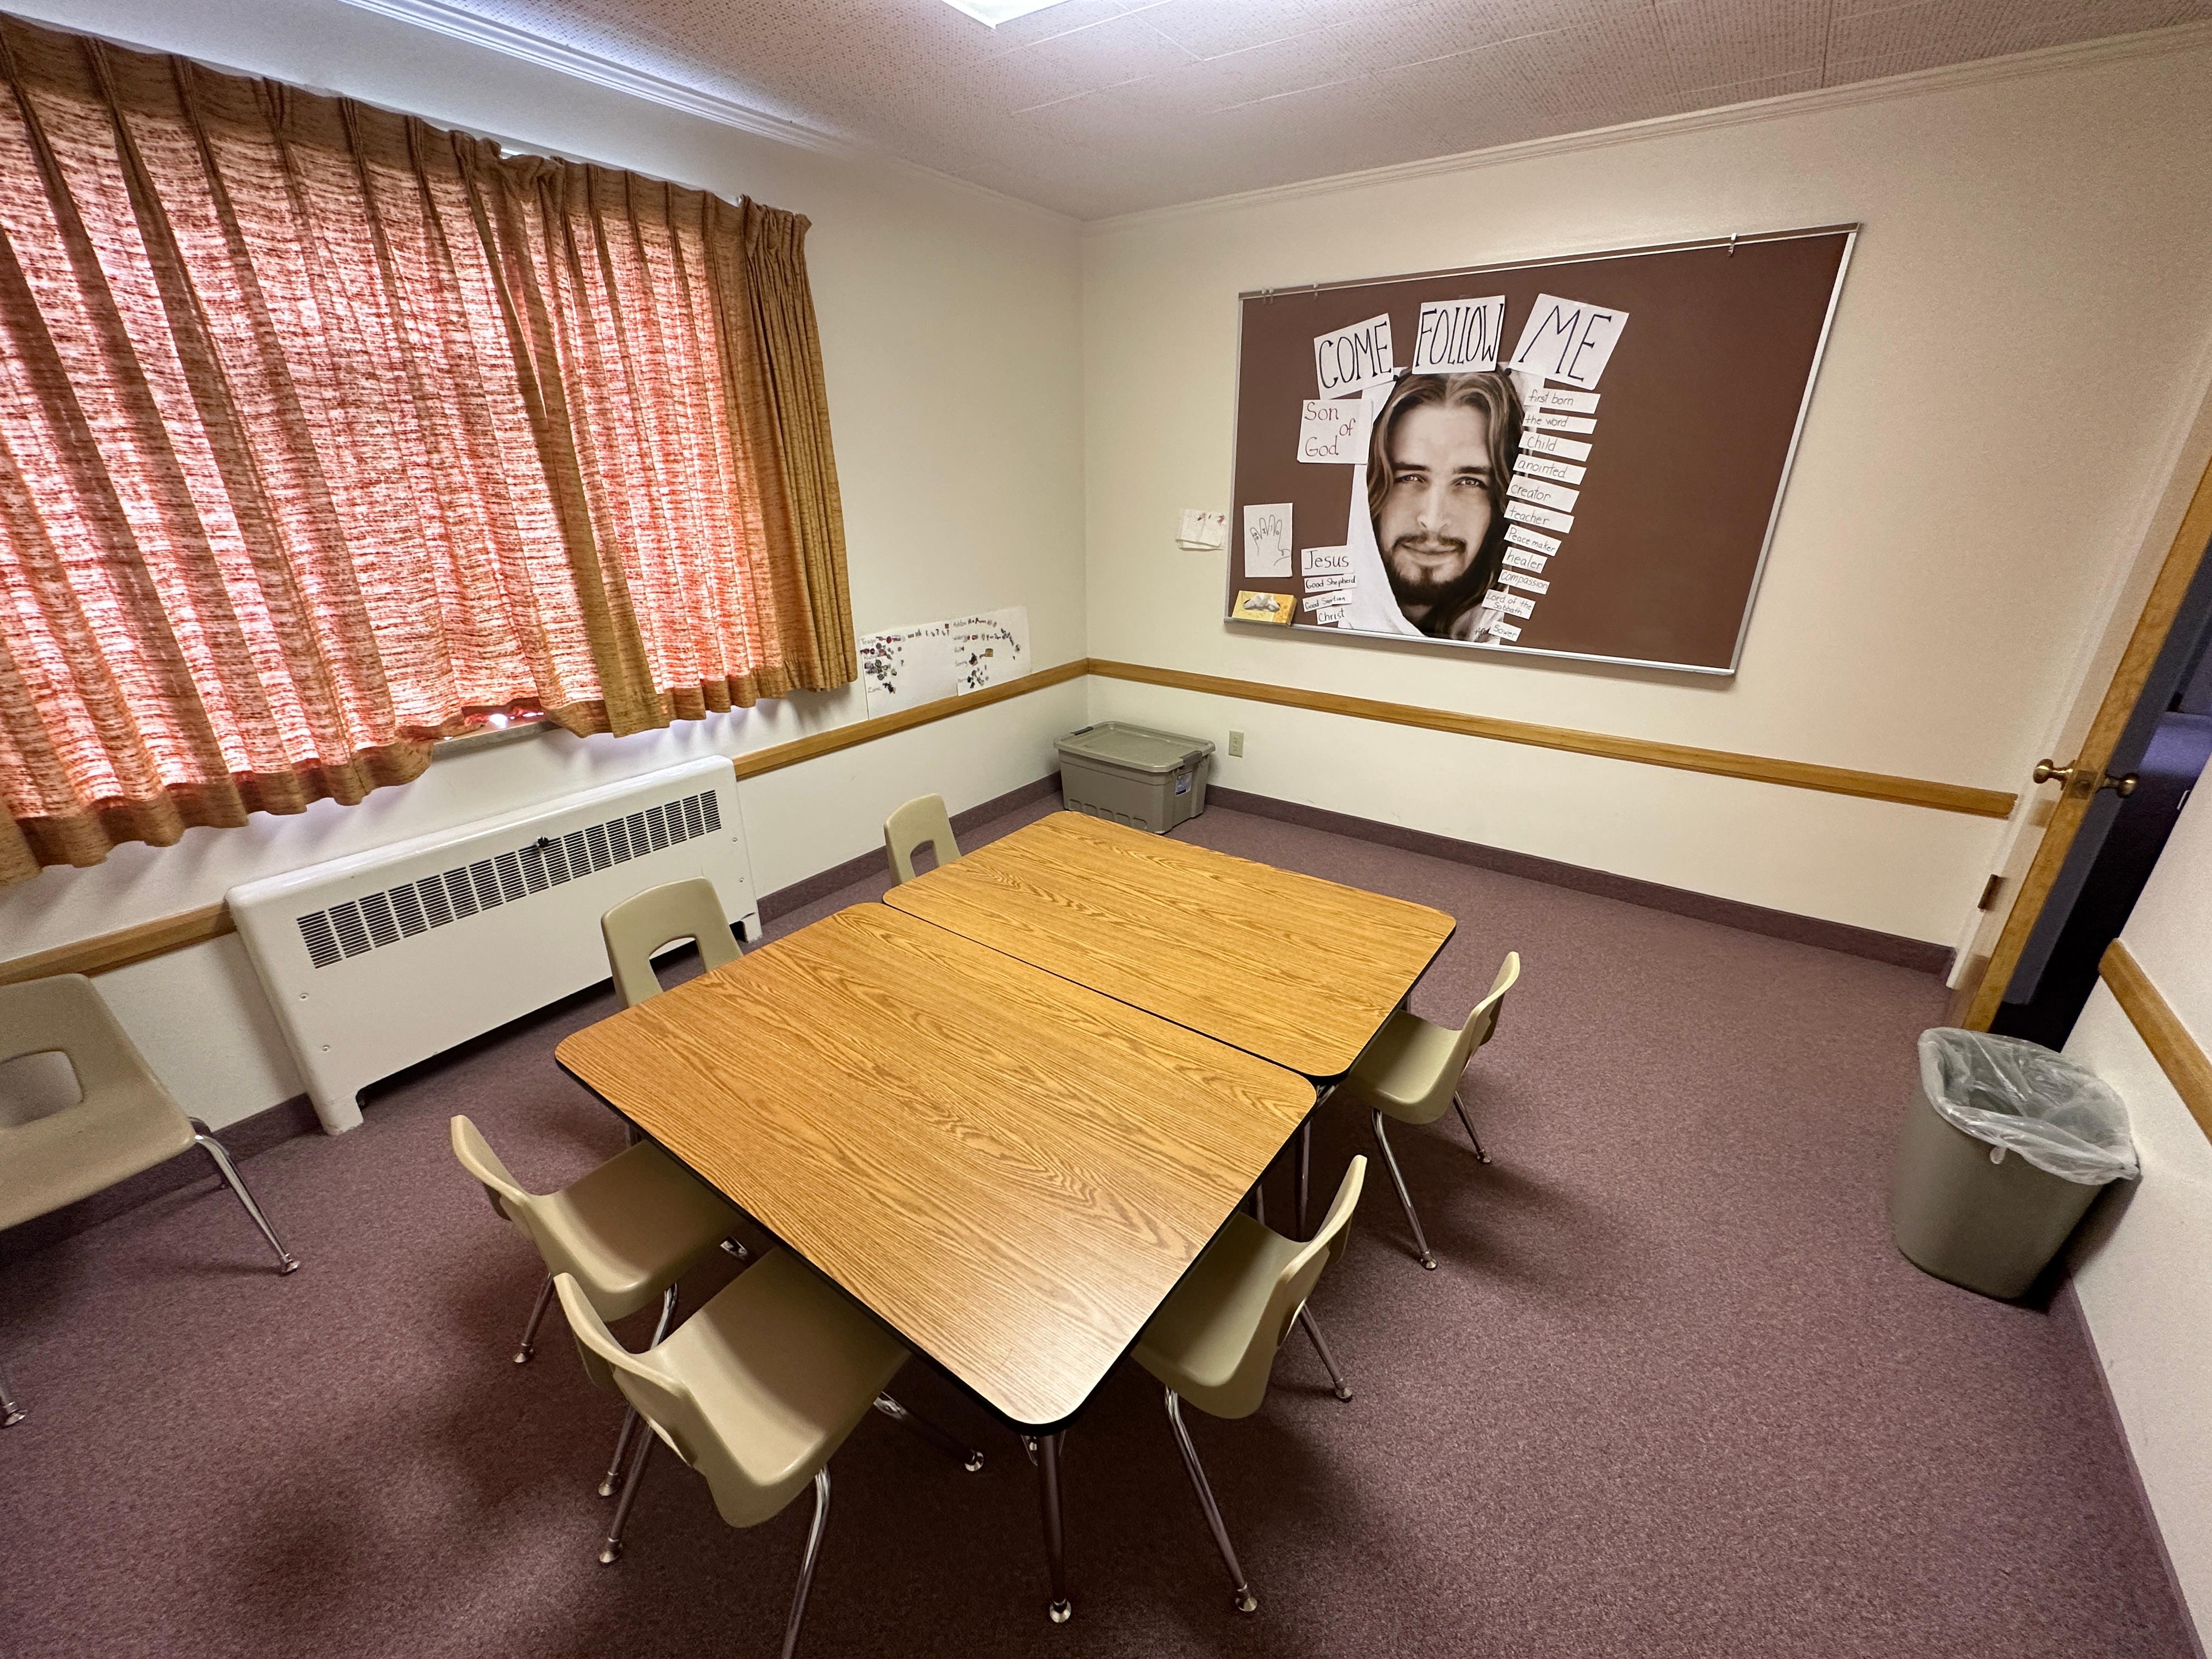 A Sunday School Classroom: This room is one example of where people attend Sunday School to study more about Jesus Christ's life.